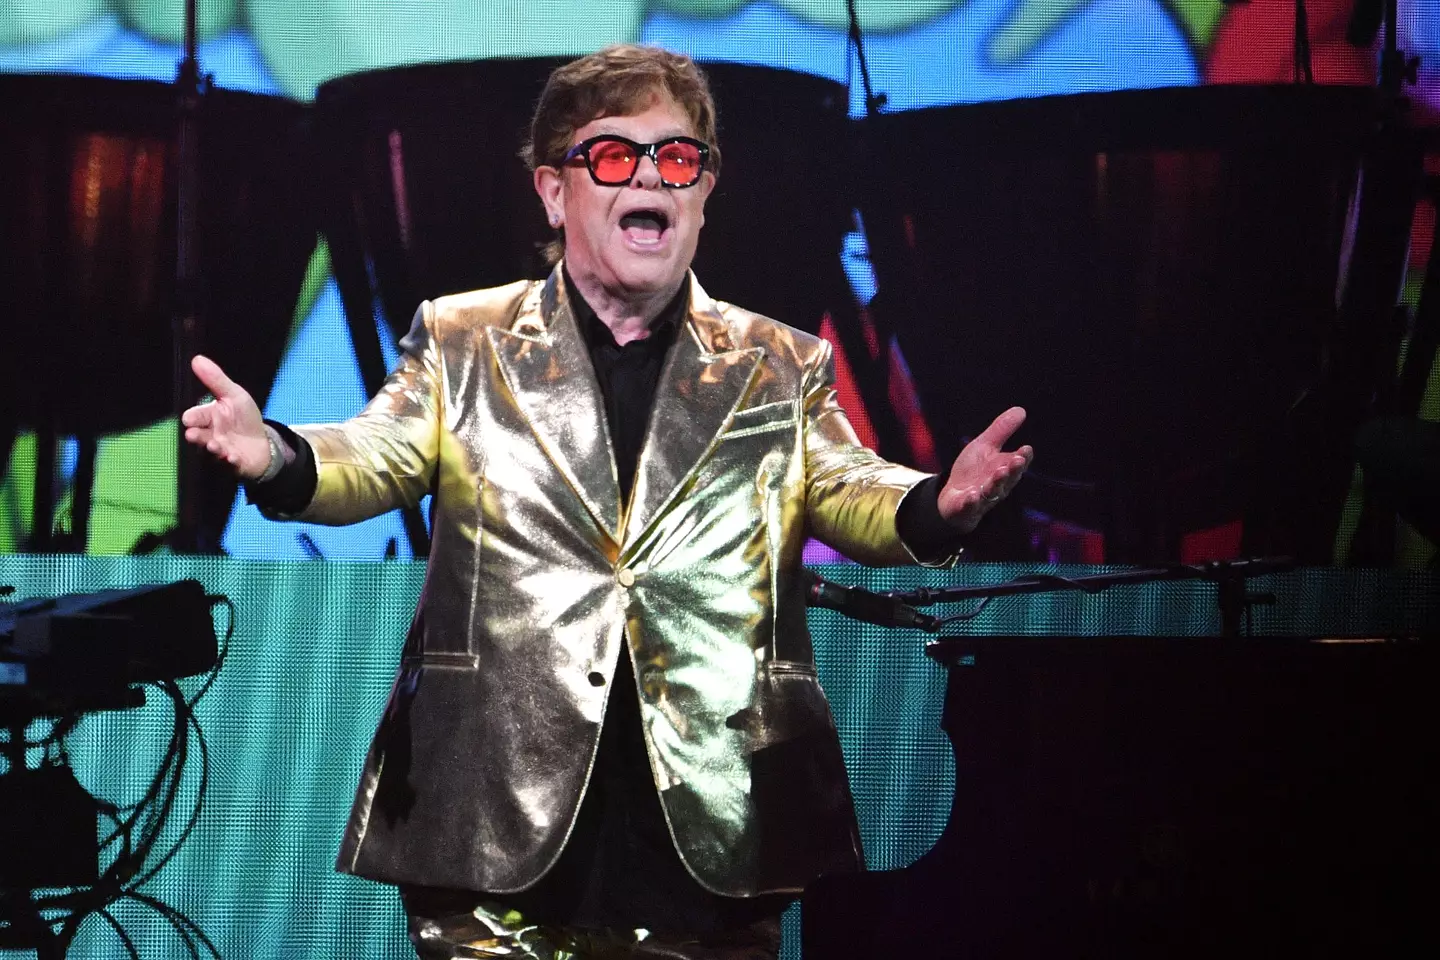 The 'Rocket Man' singer was treated in hospital over the weekend.